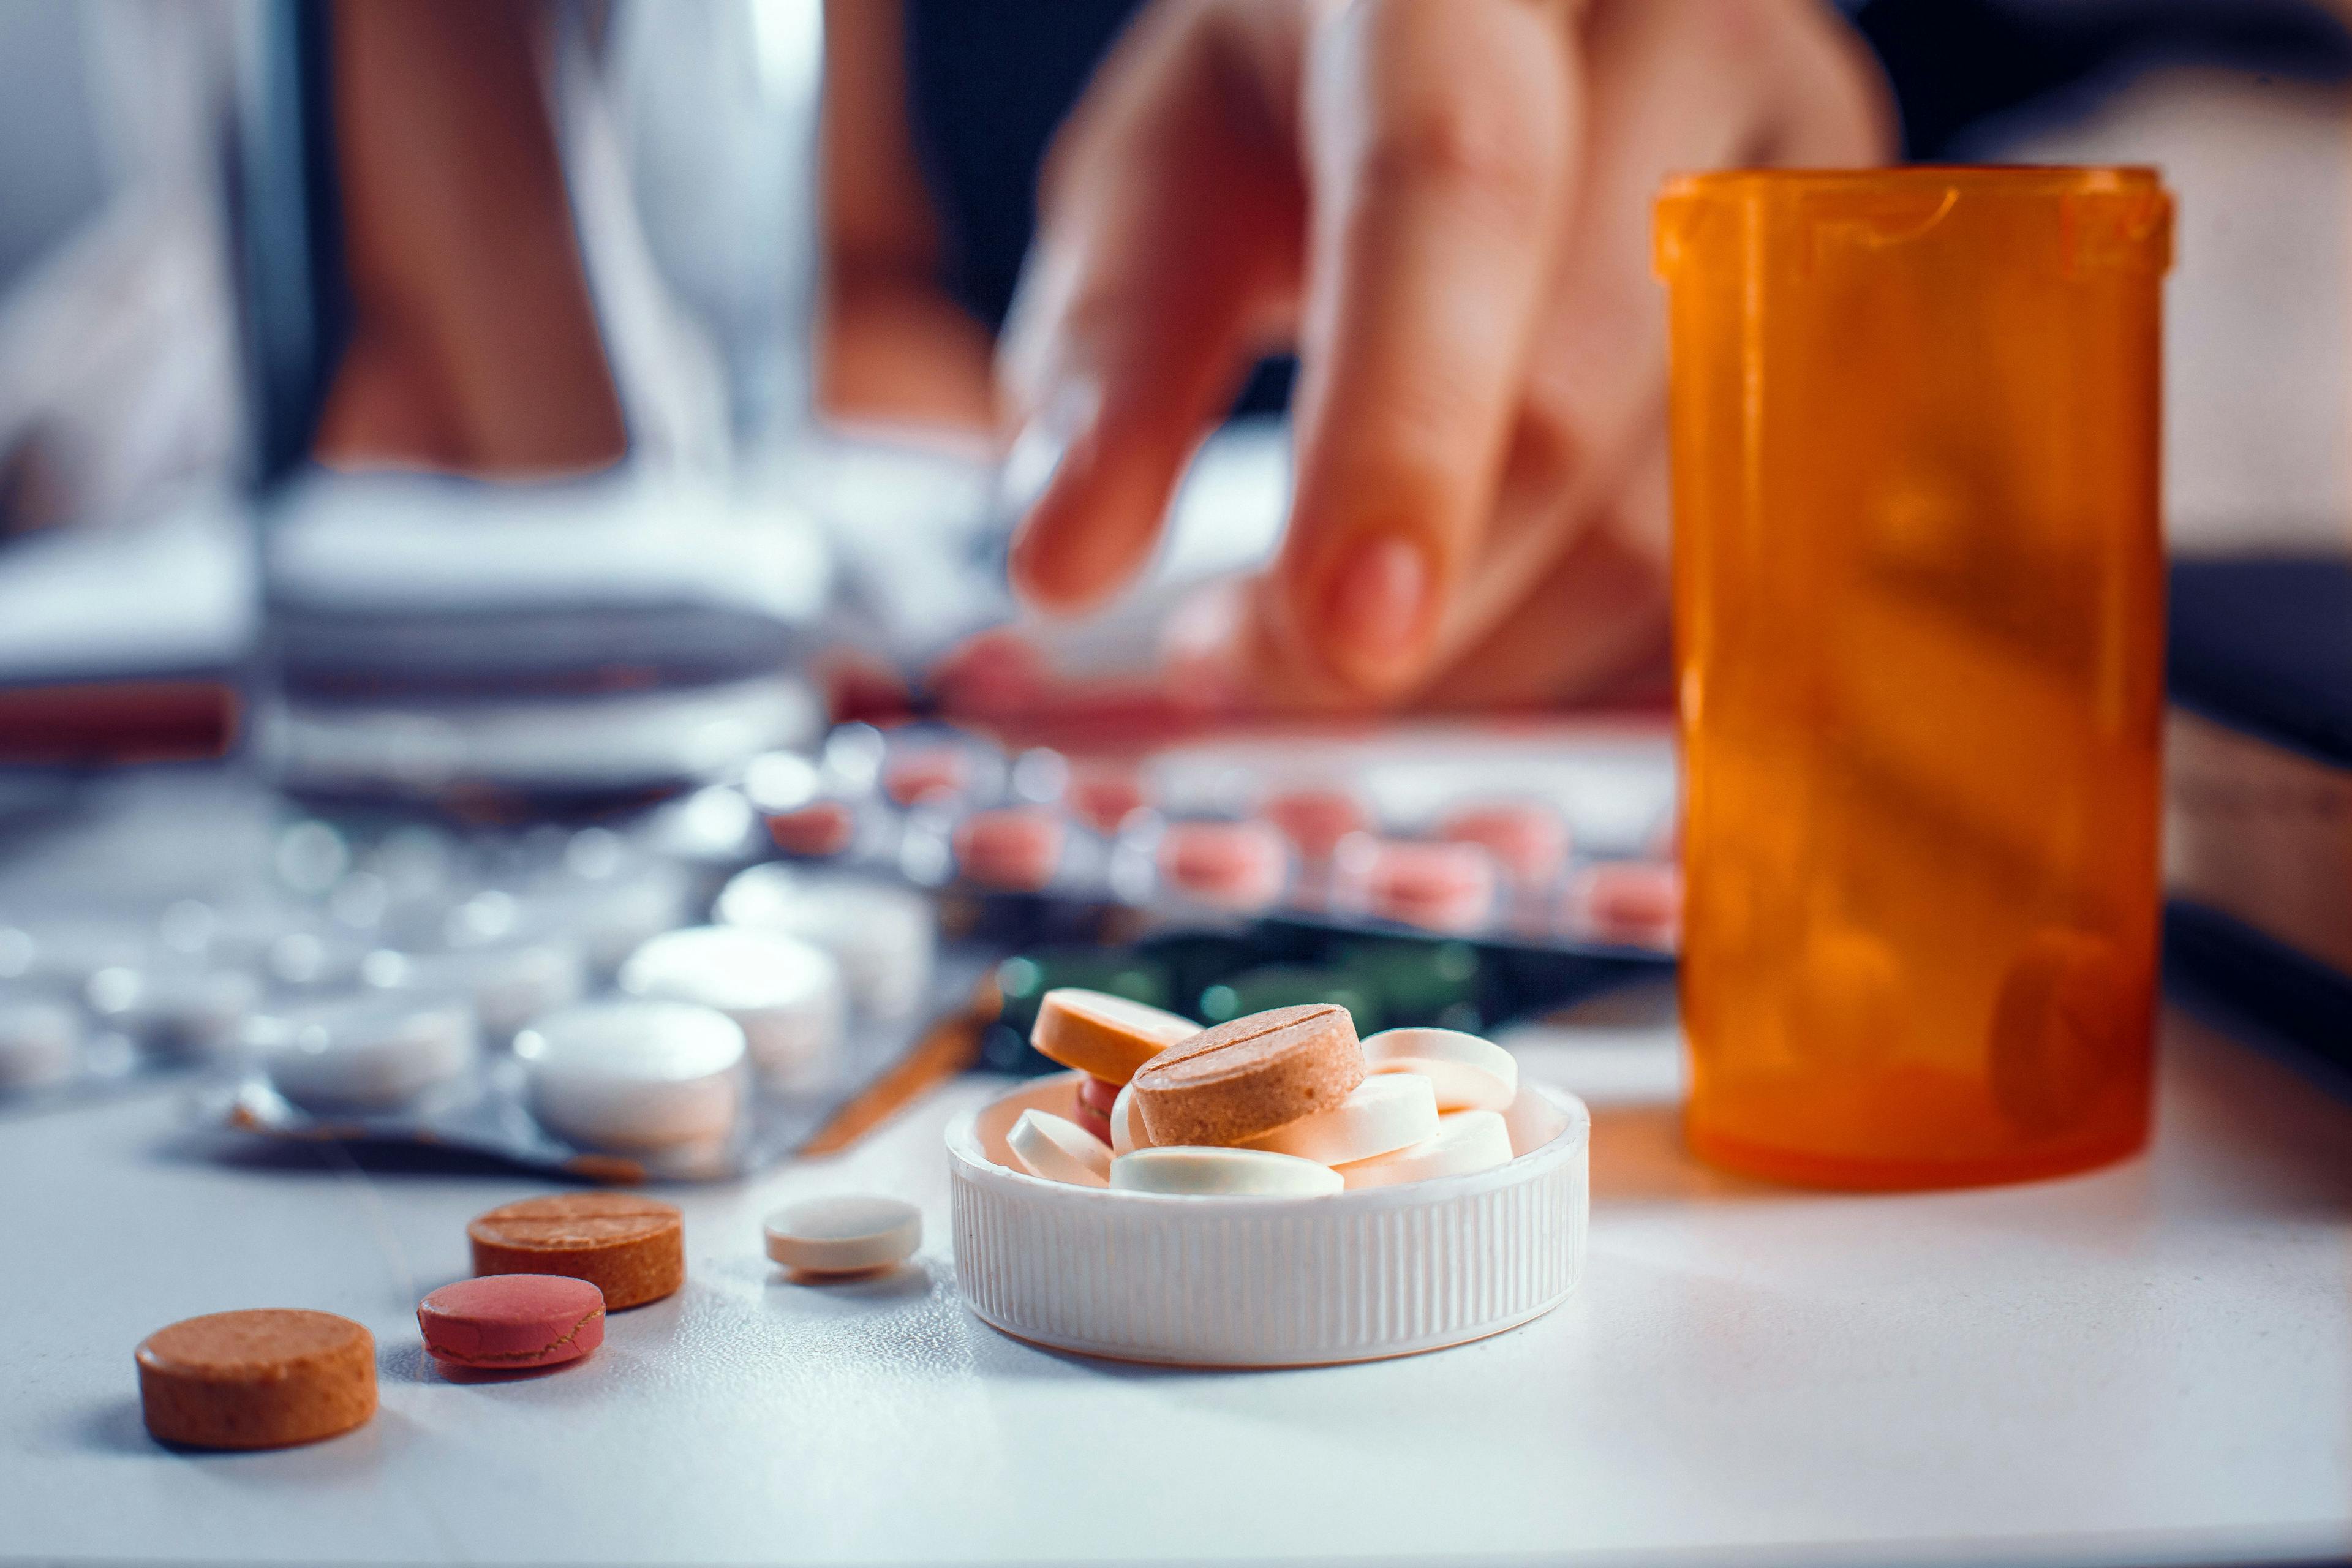 Pills Laid Out on Table | image credit: Svyatoslav Lypynkyy - stock.adobe.com